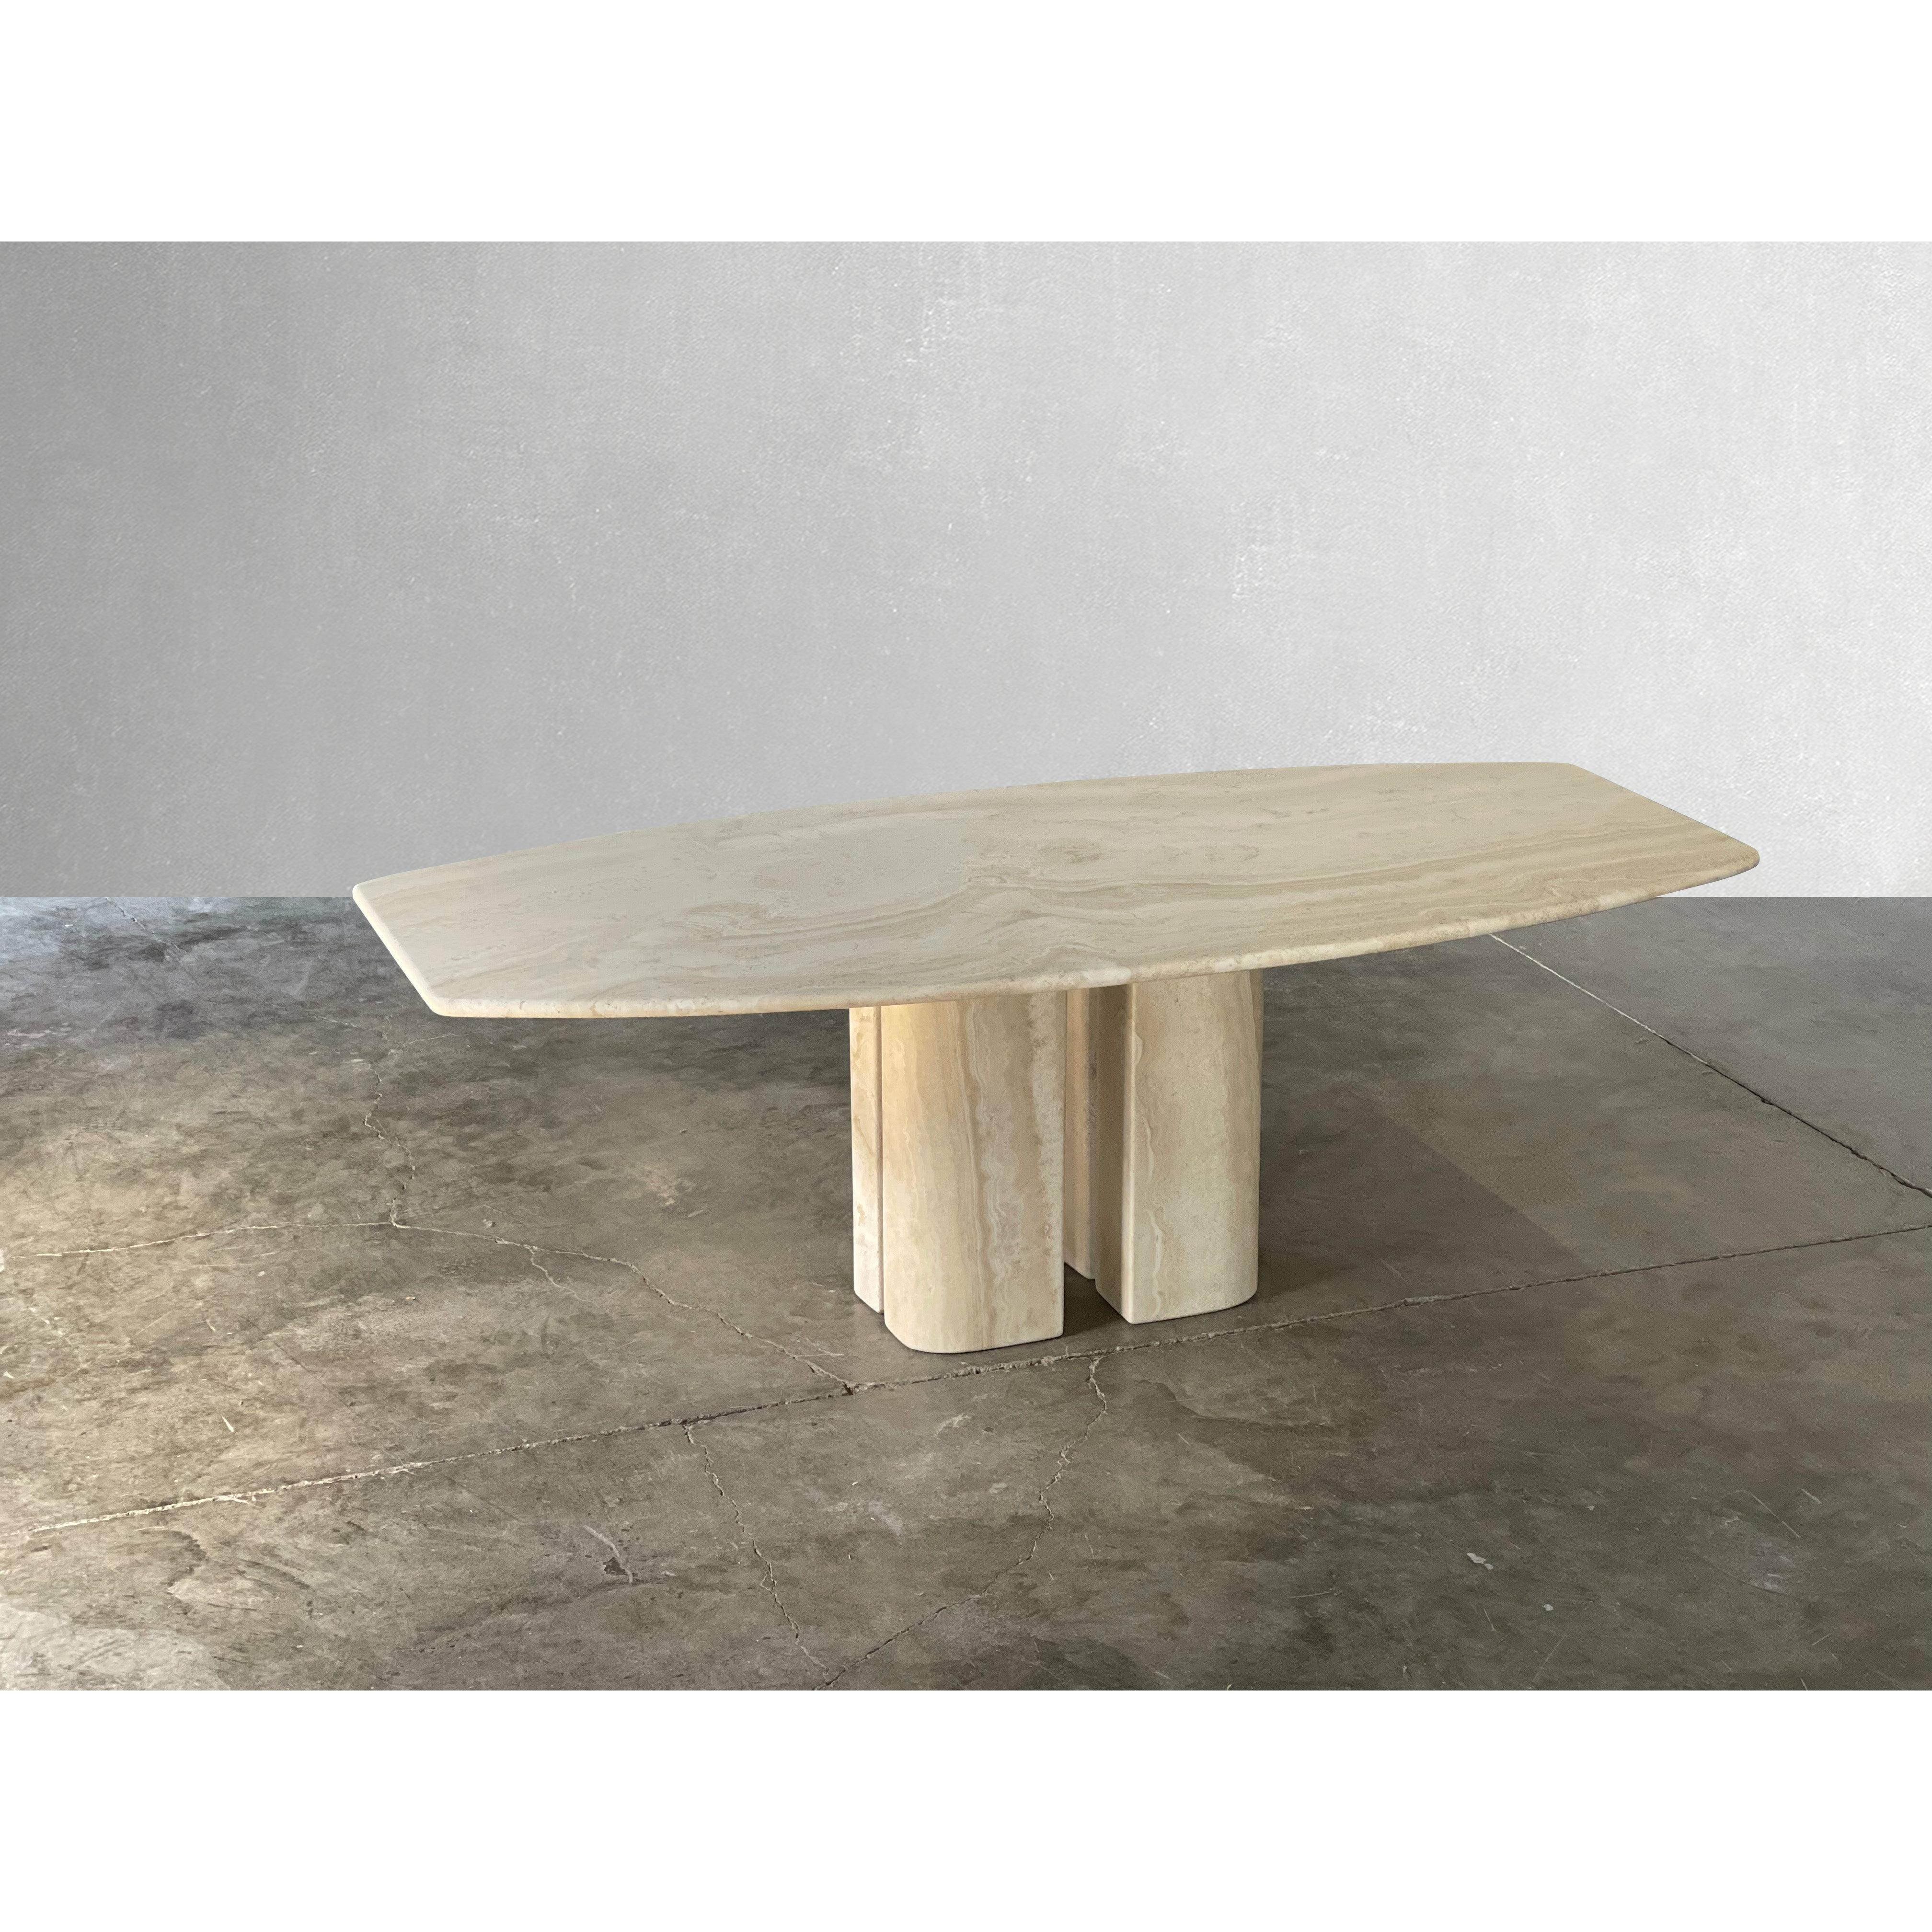 Vintage Italian Travertine dining table with Sculptural Bases

C.1980 by Maurice Villency for Roche Bobois

Oversized travertine table that can seat 8-10 comfortably. This table is one of the larger travertine tables we have come across. The